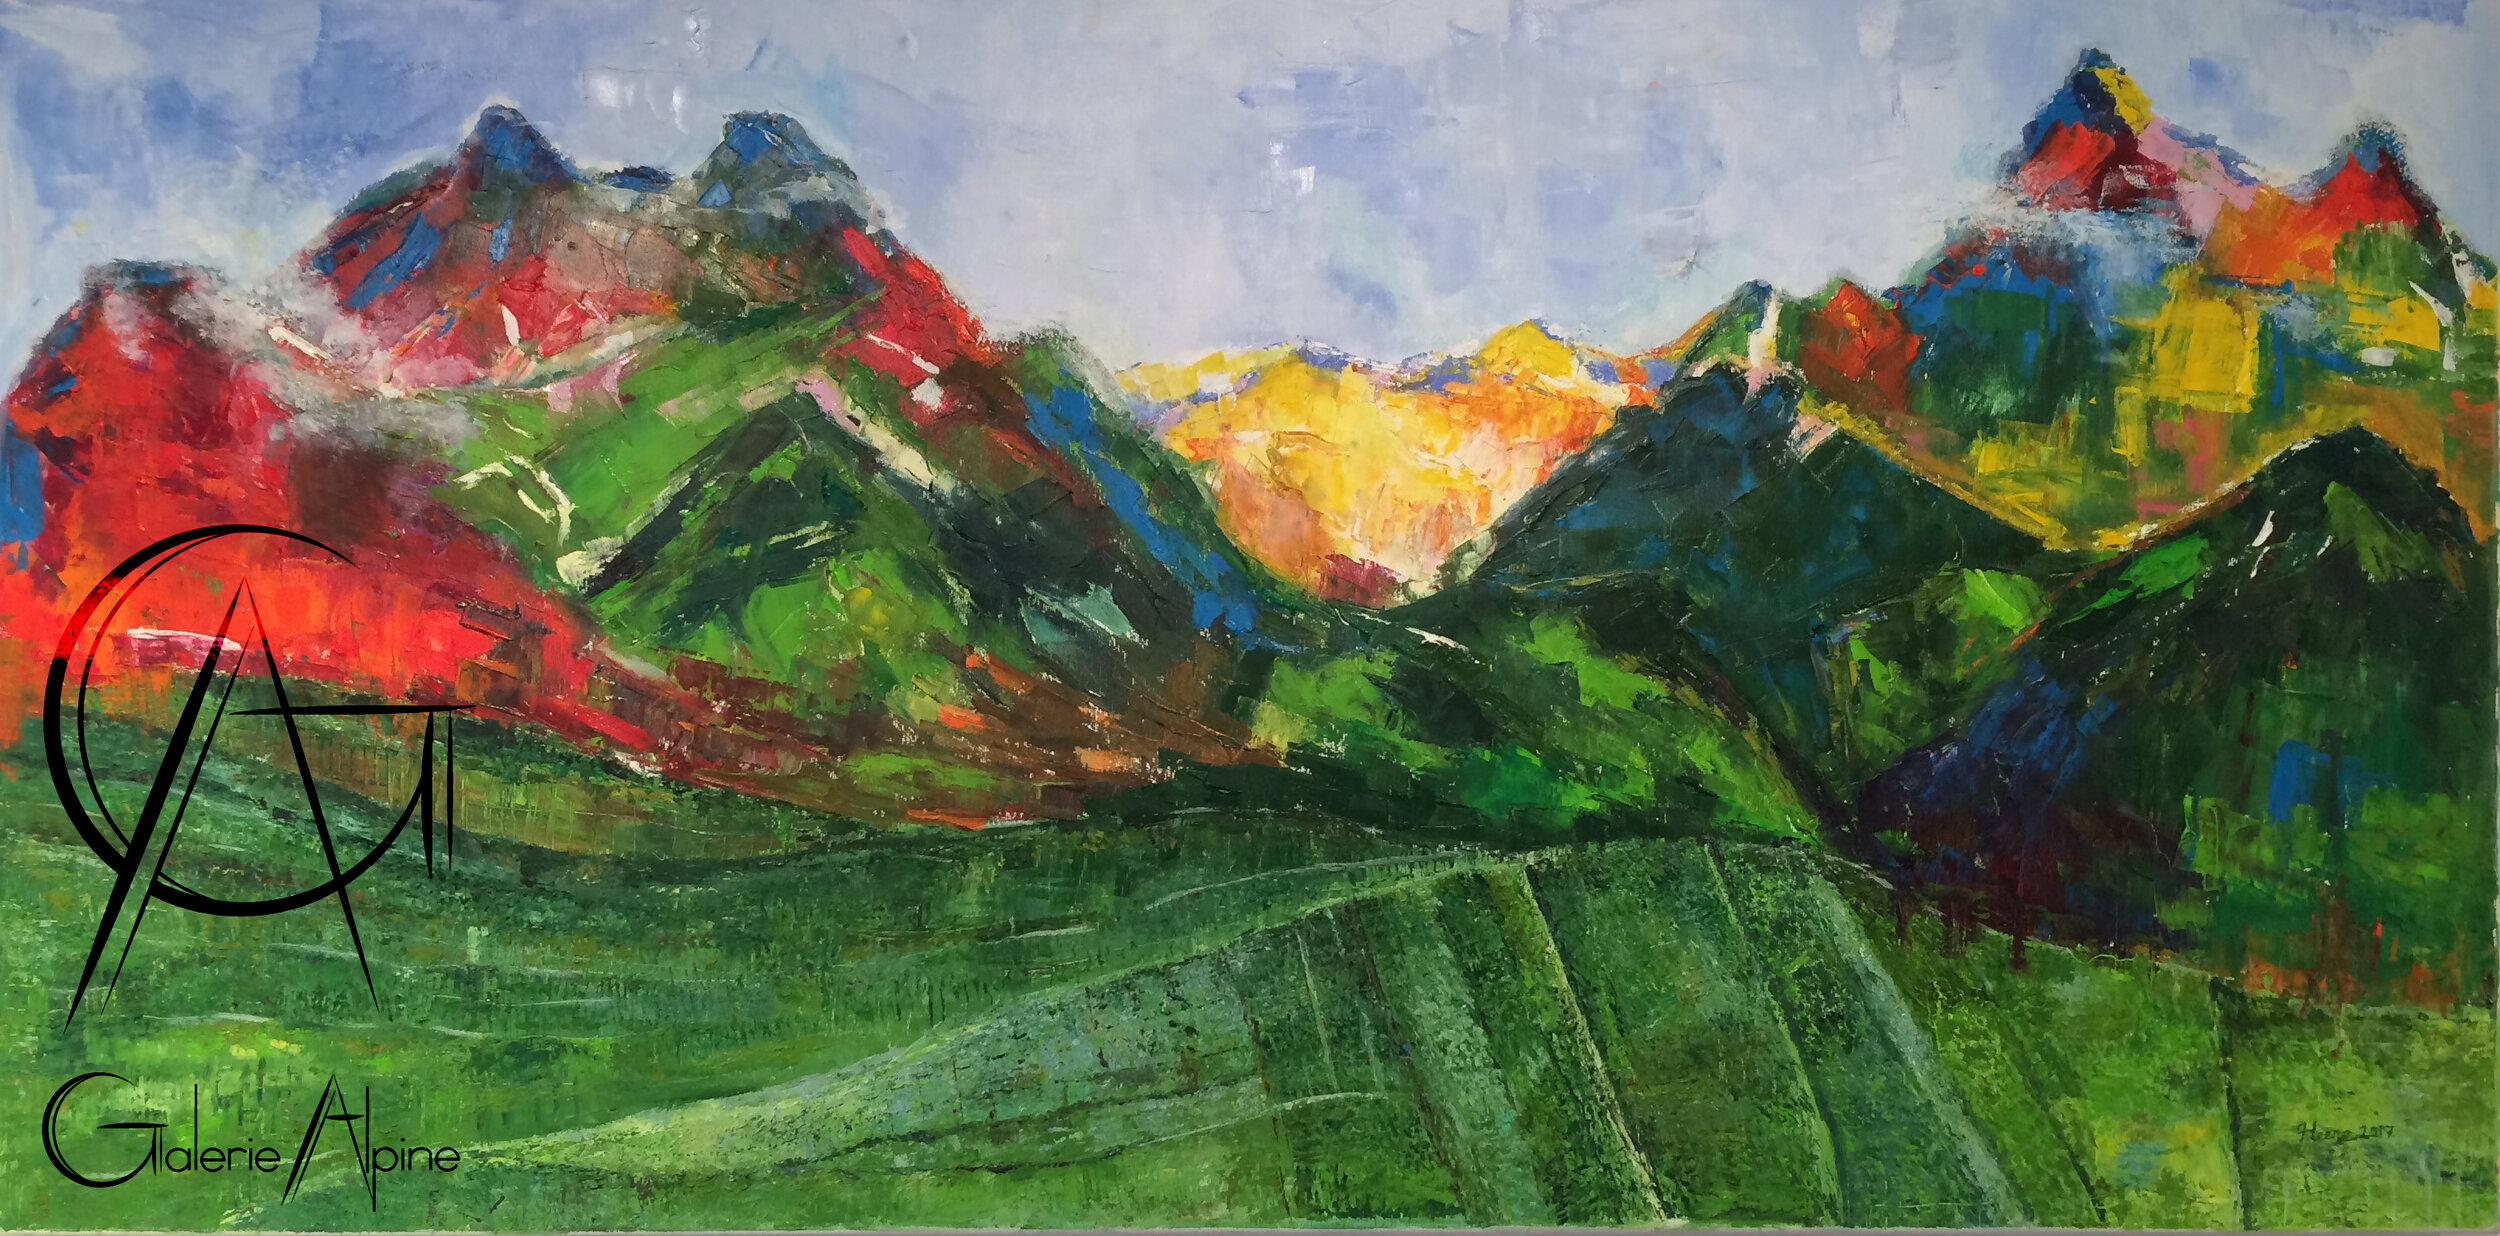 Heena Sheth - Mountains in Abstract - Oil on canvas - 70x140cm.jpg